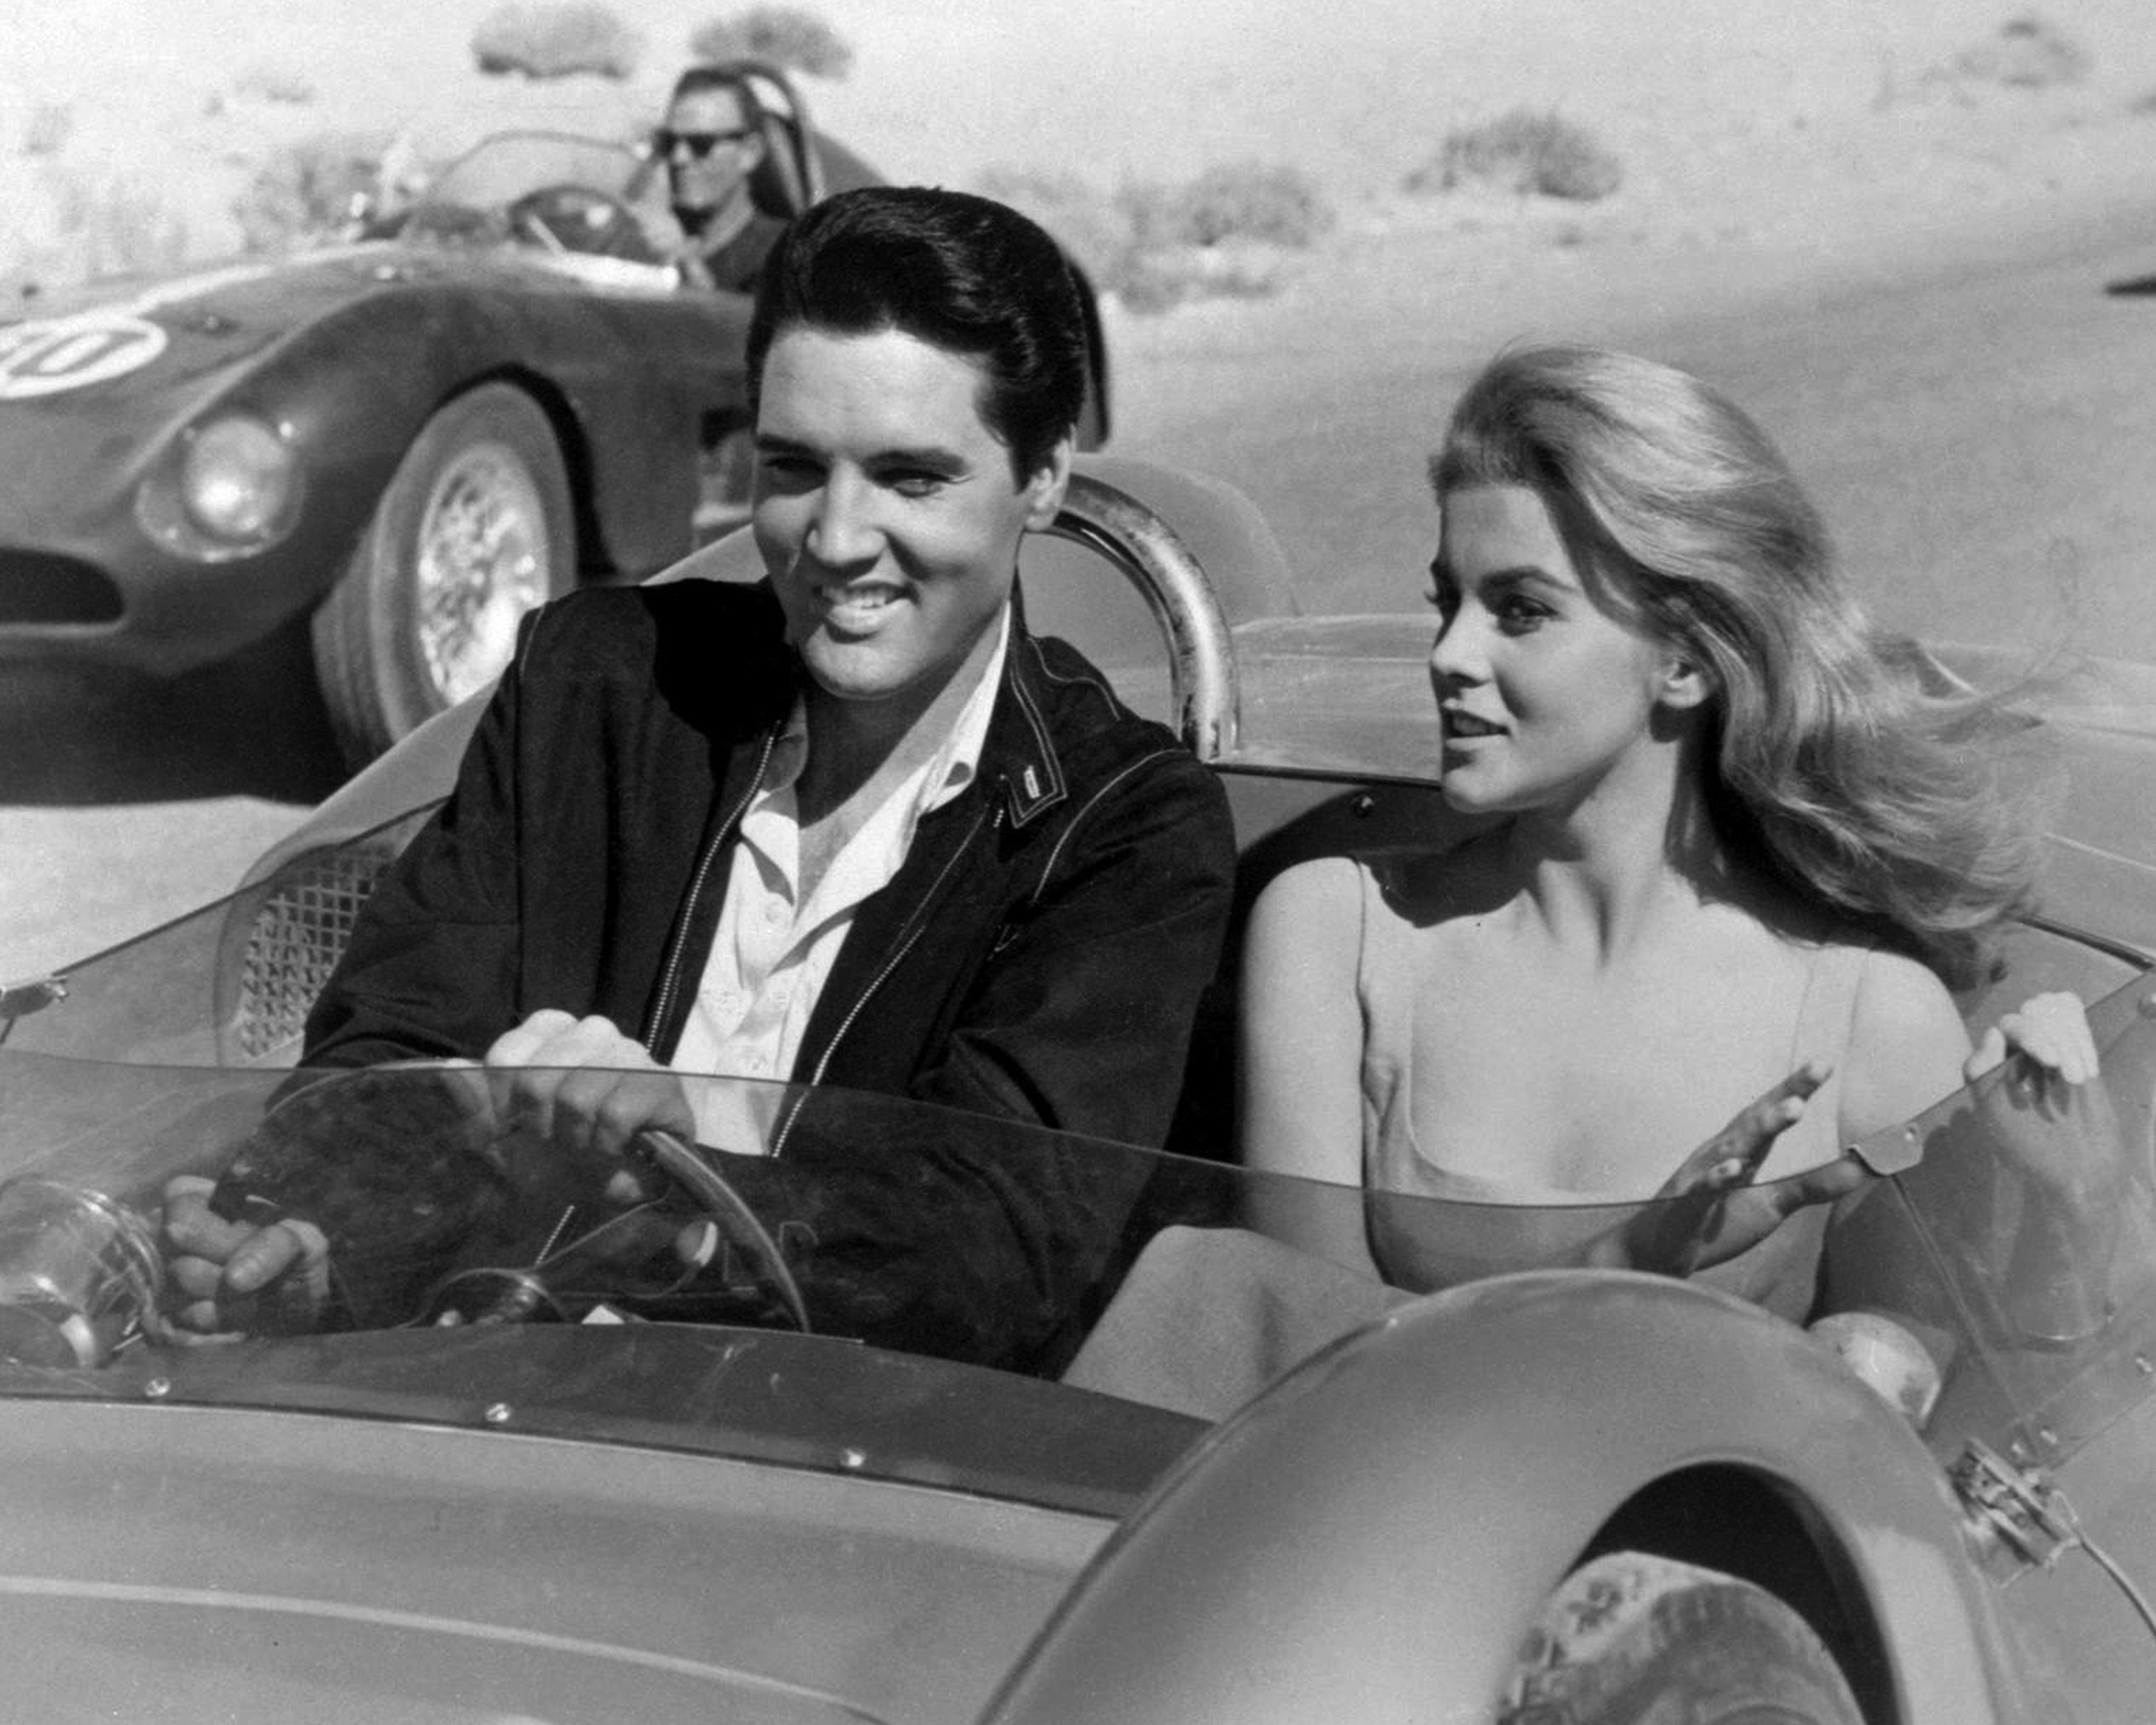 A black and white photo of Elvis Presley and Ann-Margret on the set of 'Viva Las Vegas'